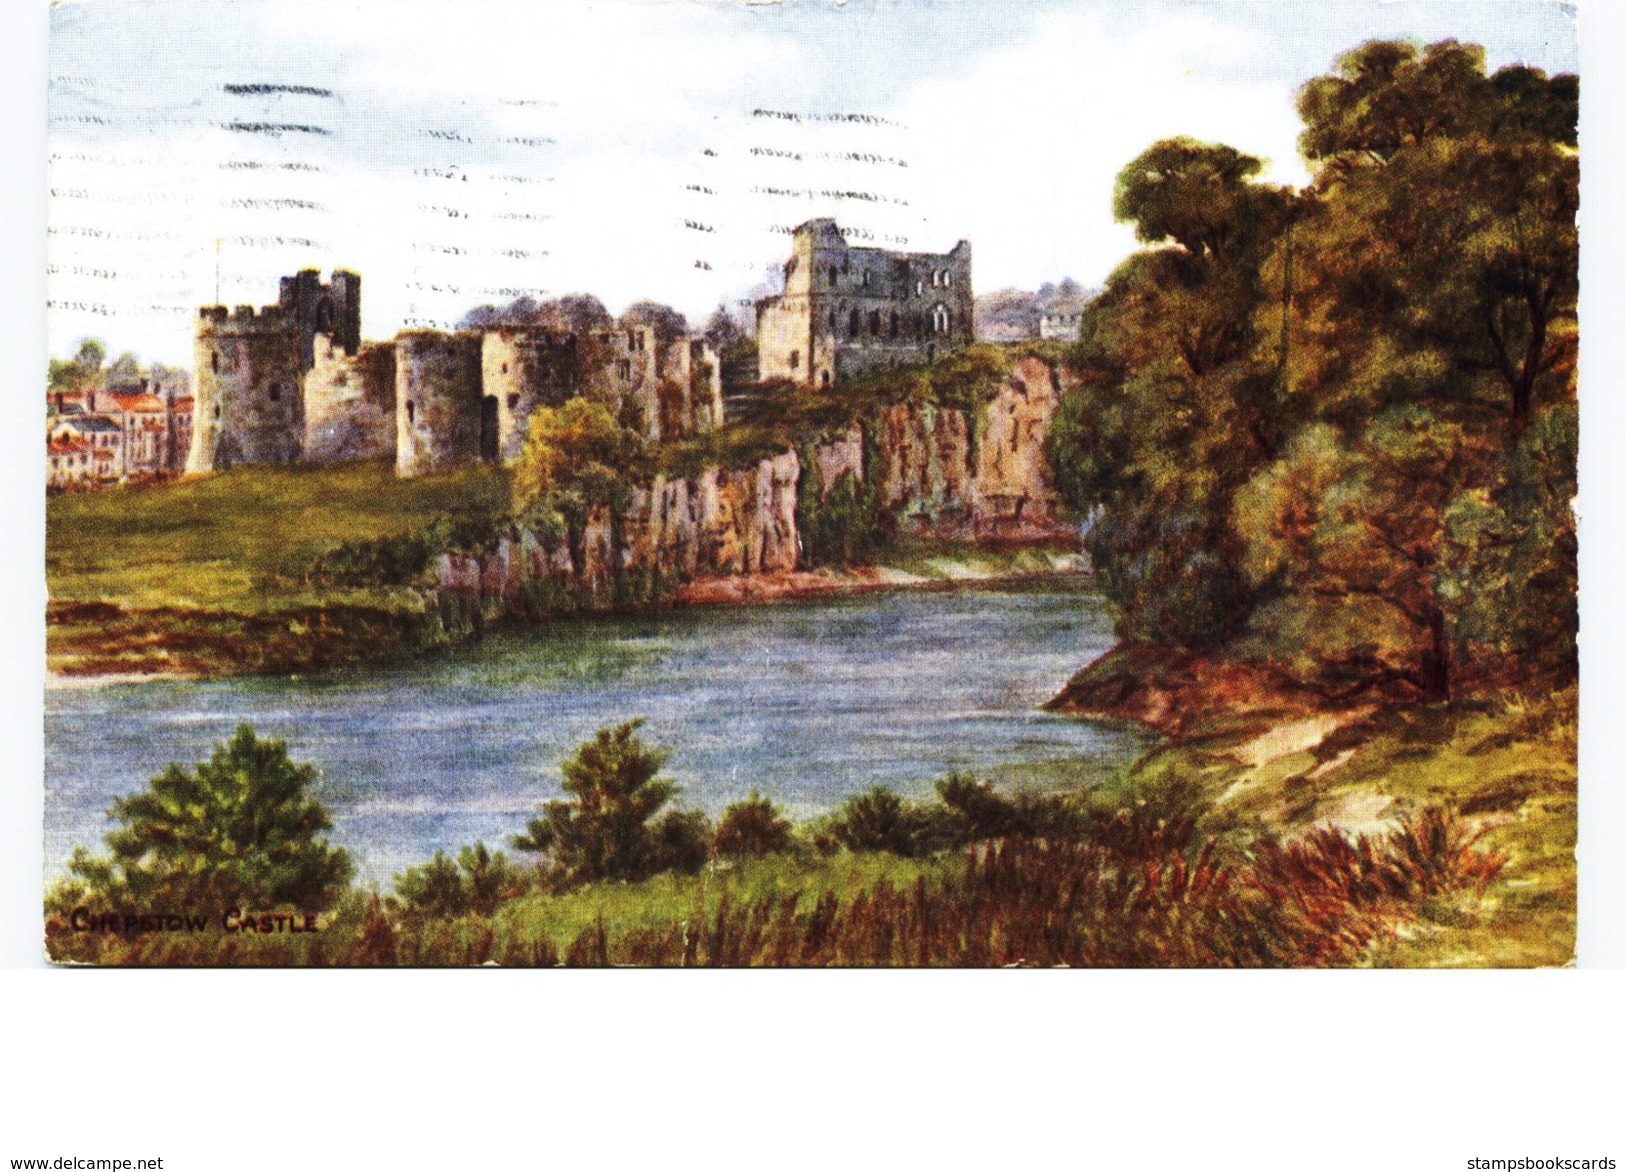 Chepstow Castle Posted Monmouth 1956 Wilding To Northumberland - Monmouthshire